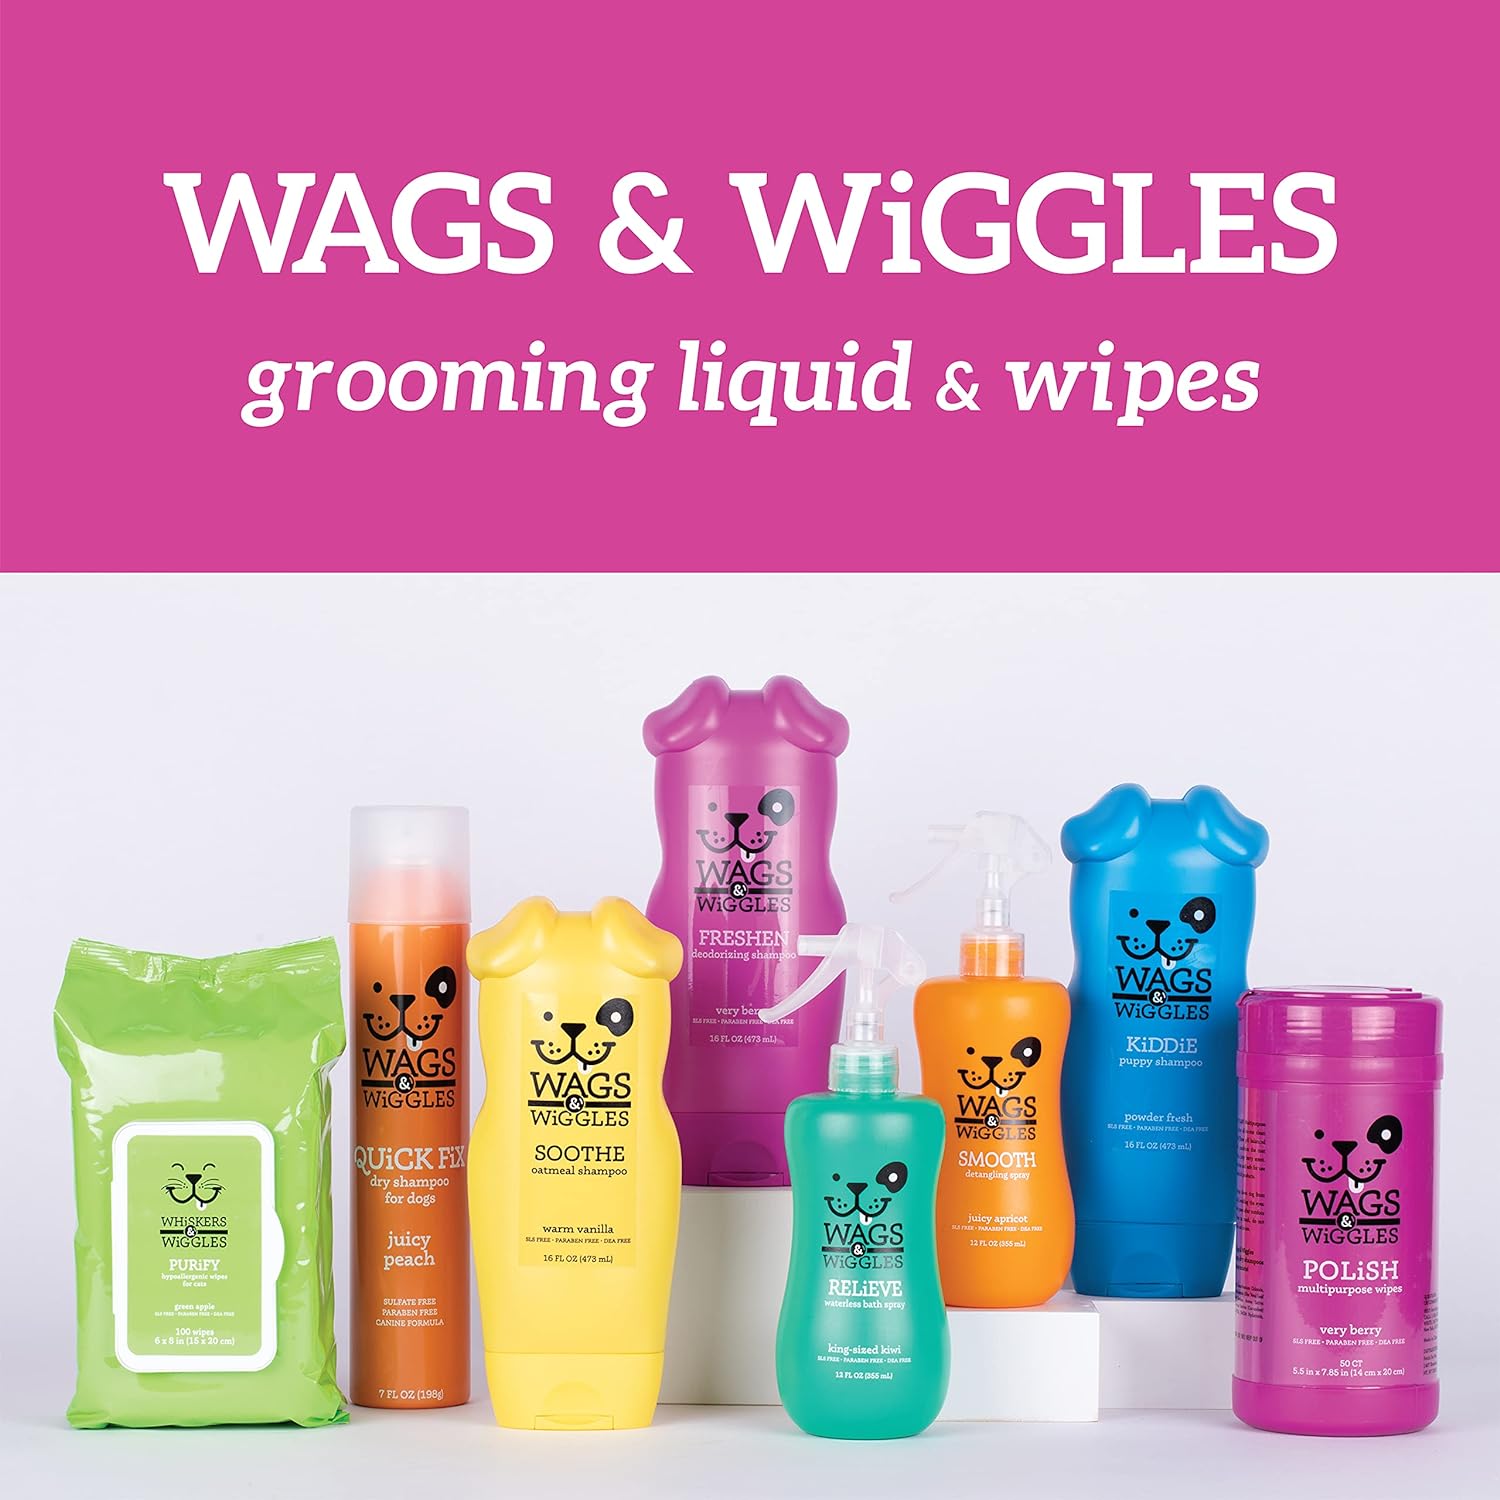 Wags & Wiggles Freshen Deodorizing Wipes for Dogs | Eliminate Odors from Your Dog's Coat | Fresh Strawberries, 100 Count | Easy and Convenient Way to Freshen Your Pet Without A Bath, FF12825